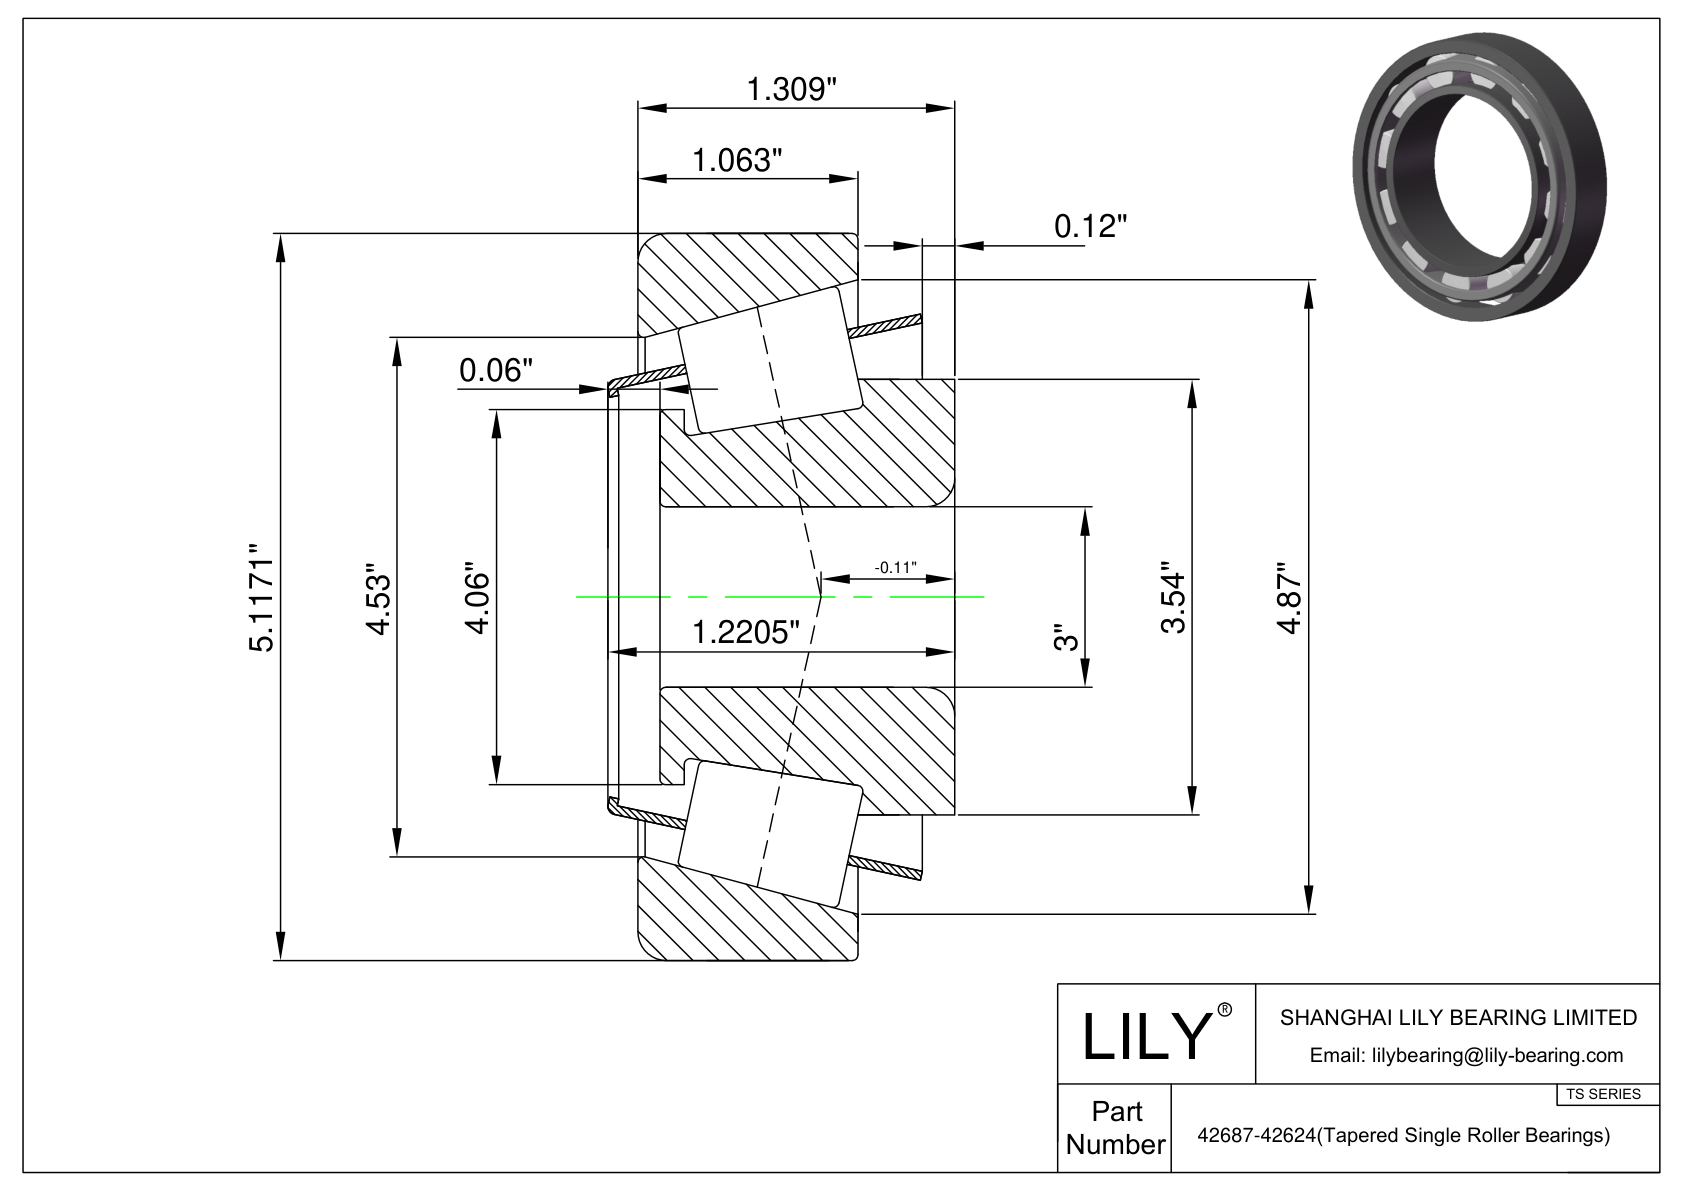 42687-42624 TS (Tapered Single Roller Bearings) (Imperial) cad drawing